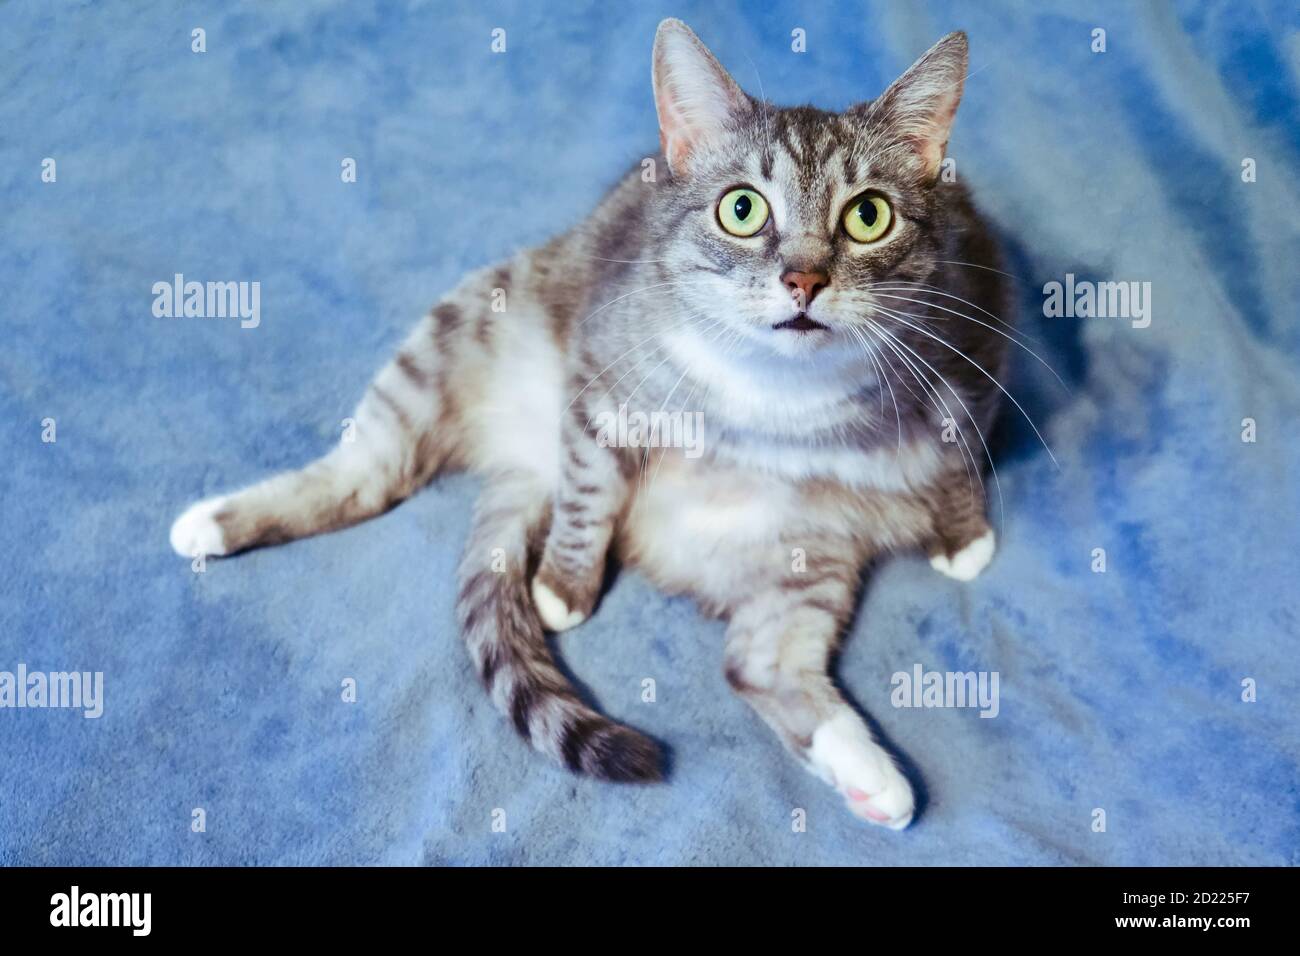 The cat is sitting like a man in a strange comical pose and looking at the camera. Funny cat is sitting on the bed, top view Stock Photo